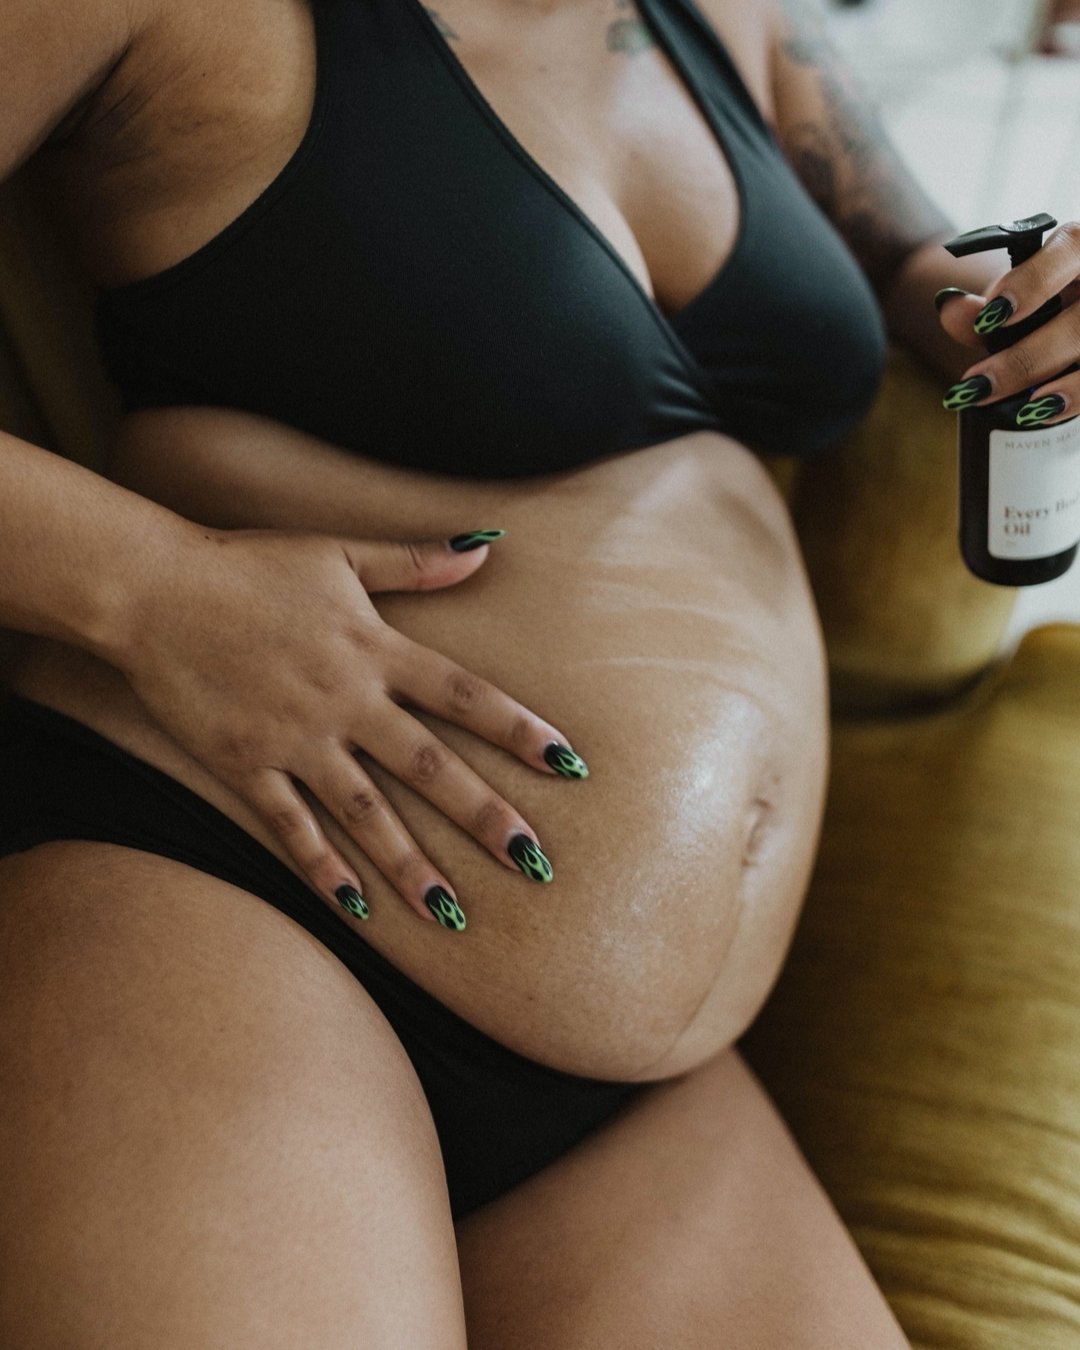 If there's one skincare topic I hear most these days and enjoy talking about, it's postpartum skin. 

The hormonal shift after giving birth often leaves skin dry, itchy, reactive, and dull (not that you're too focused on your complexion during the th